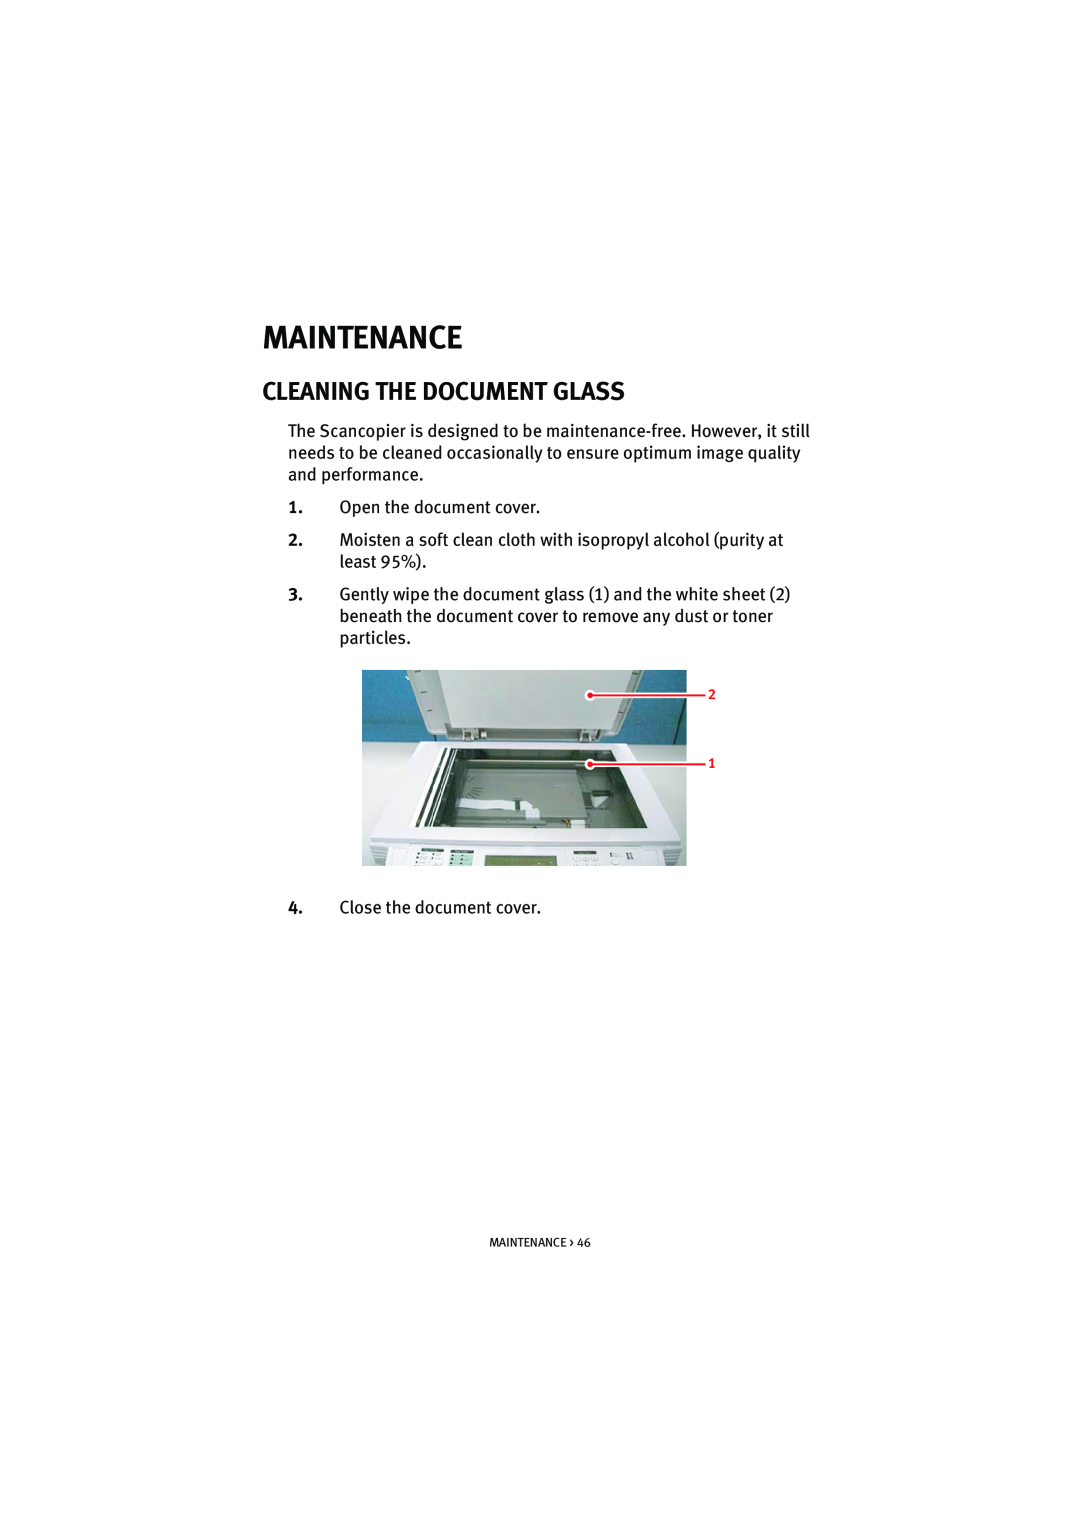 Oki S900 manual Maintenance, Cleaning The Document Glass 